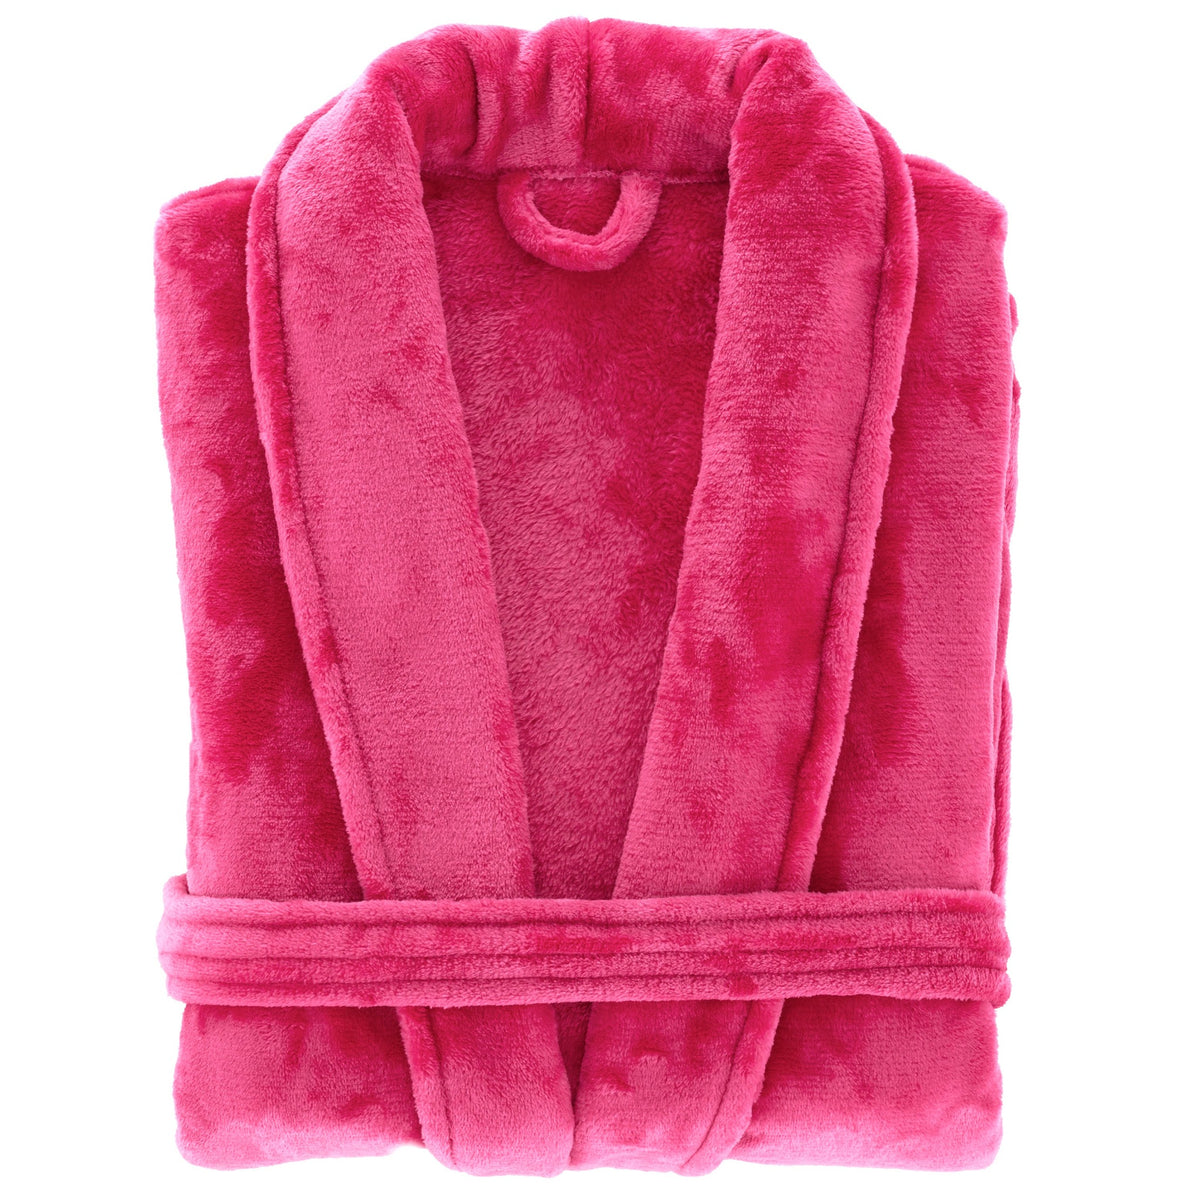 Folded Image of Pine Cone Hill Sheepy Fleece 2.0 Robe in Color Cerise